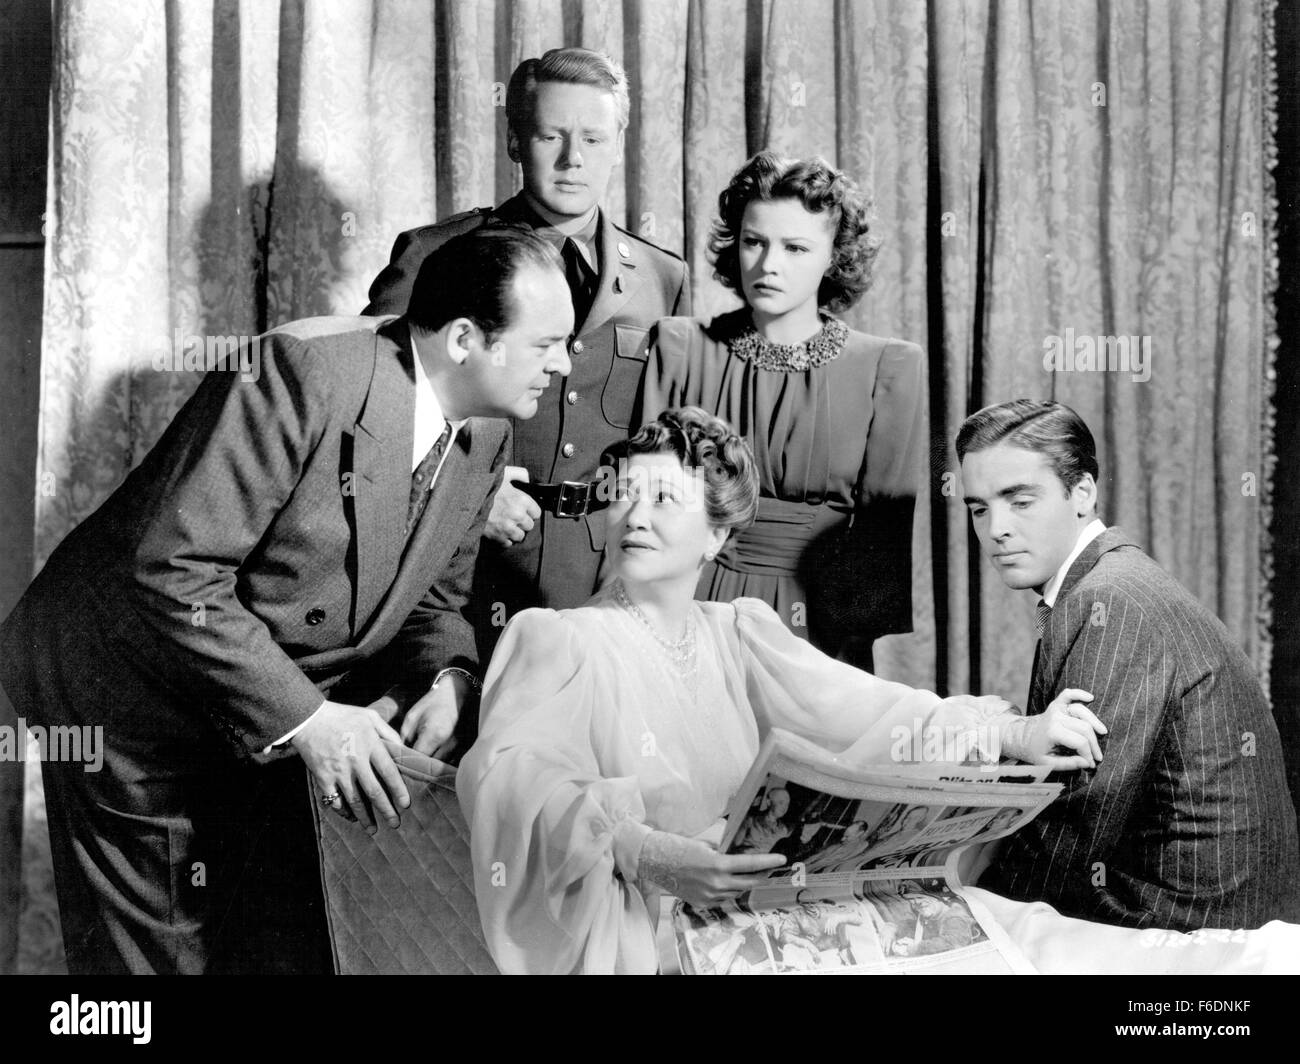 RELEASE DATE: August 7, 1942. MOVIE TITLE: The War Against Mrs. Hadley. STUDIO: Metro-Goldwyn-Mayer (MGM). PLOT: . PICTURED: FAY BAINTER as Stella Hadley, JEAN ROGERS as Patricia Hadley and VAN JOHNSON as Michael Fitzpatrick. Stock Photo